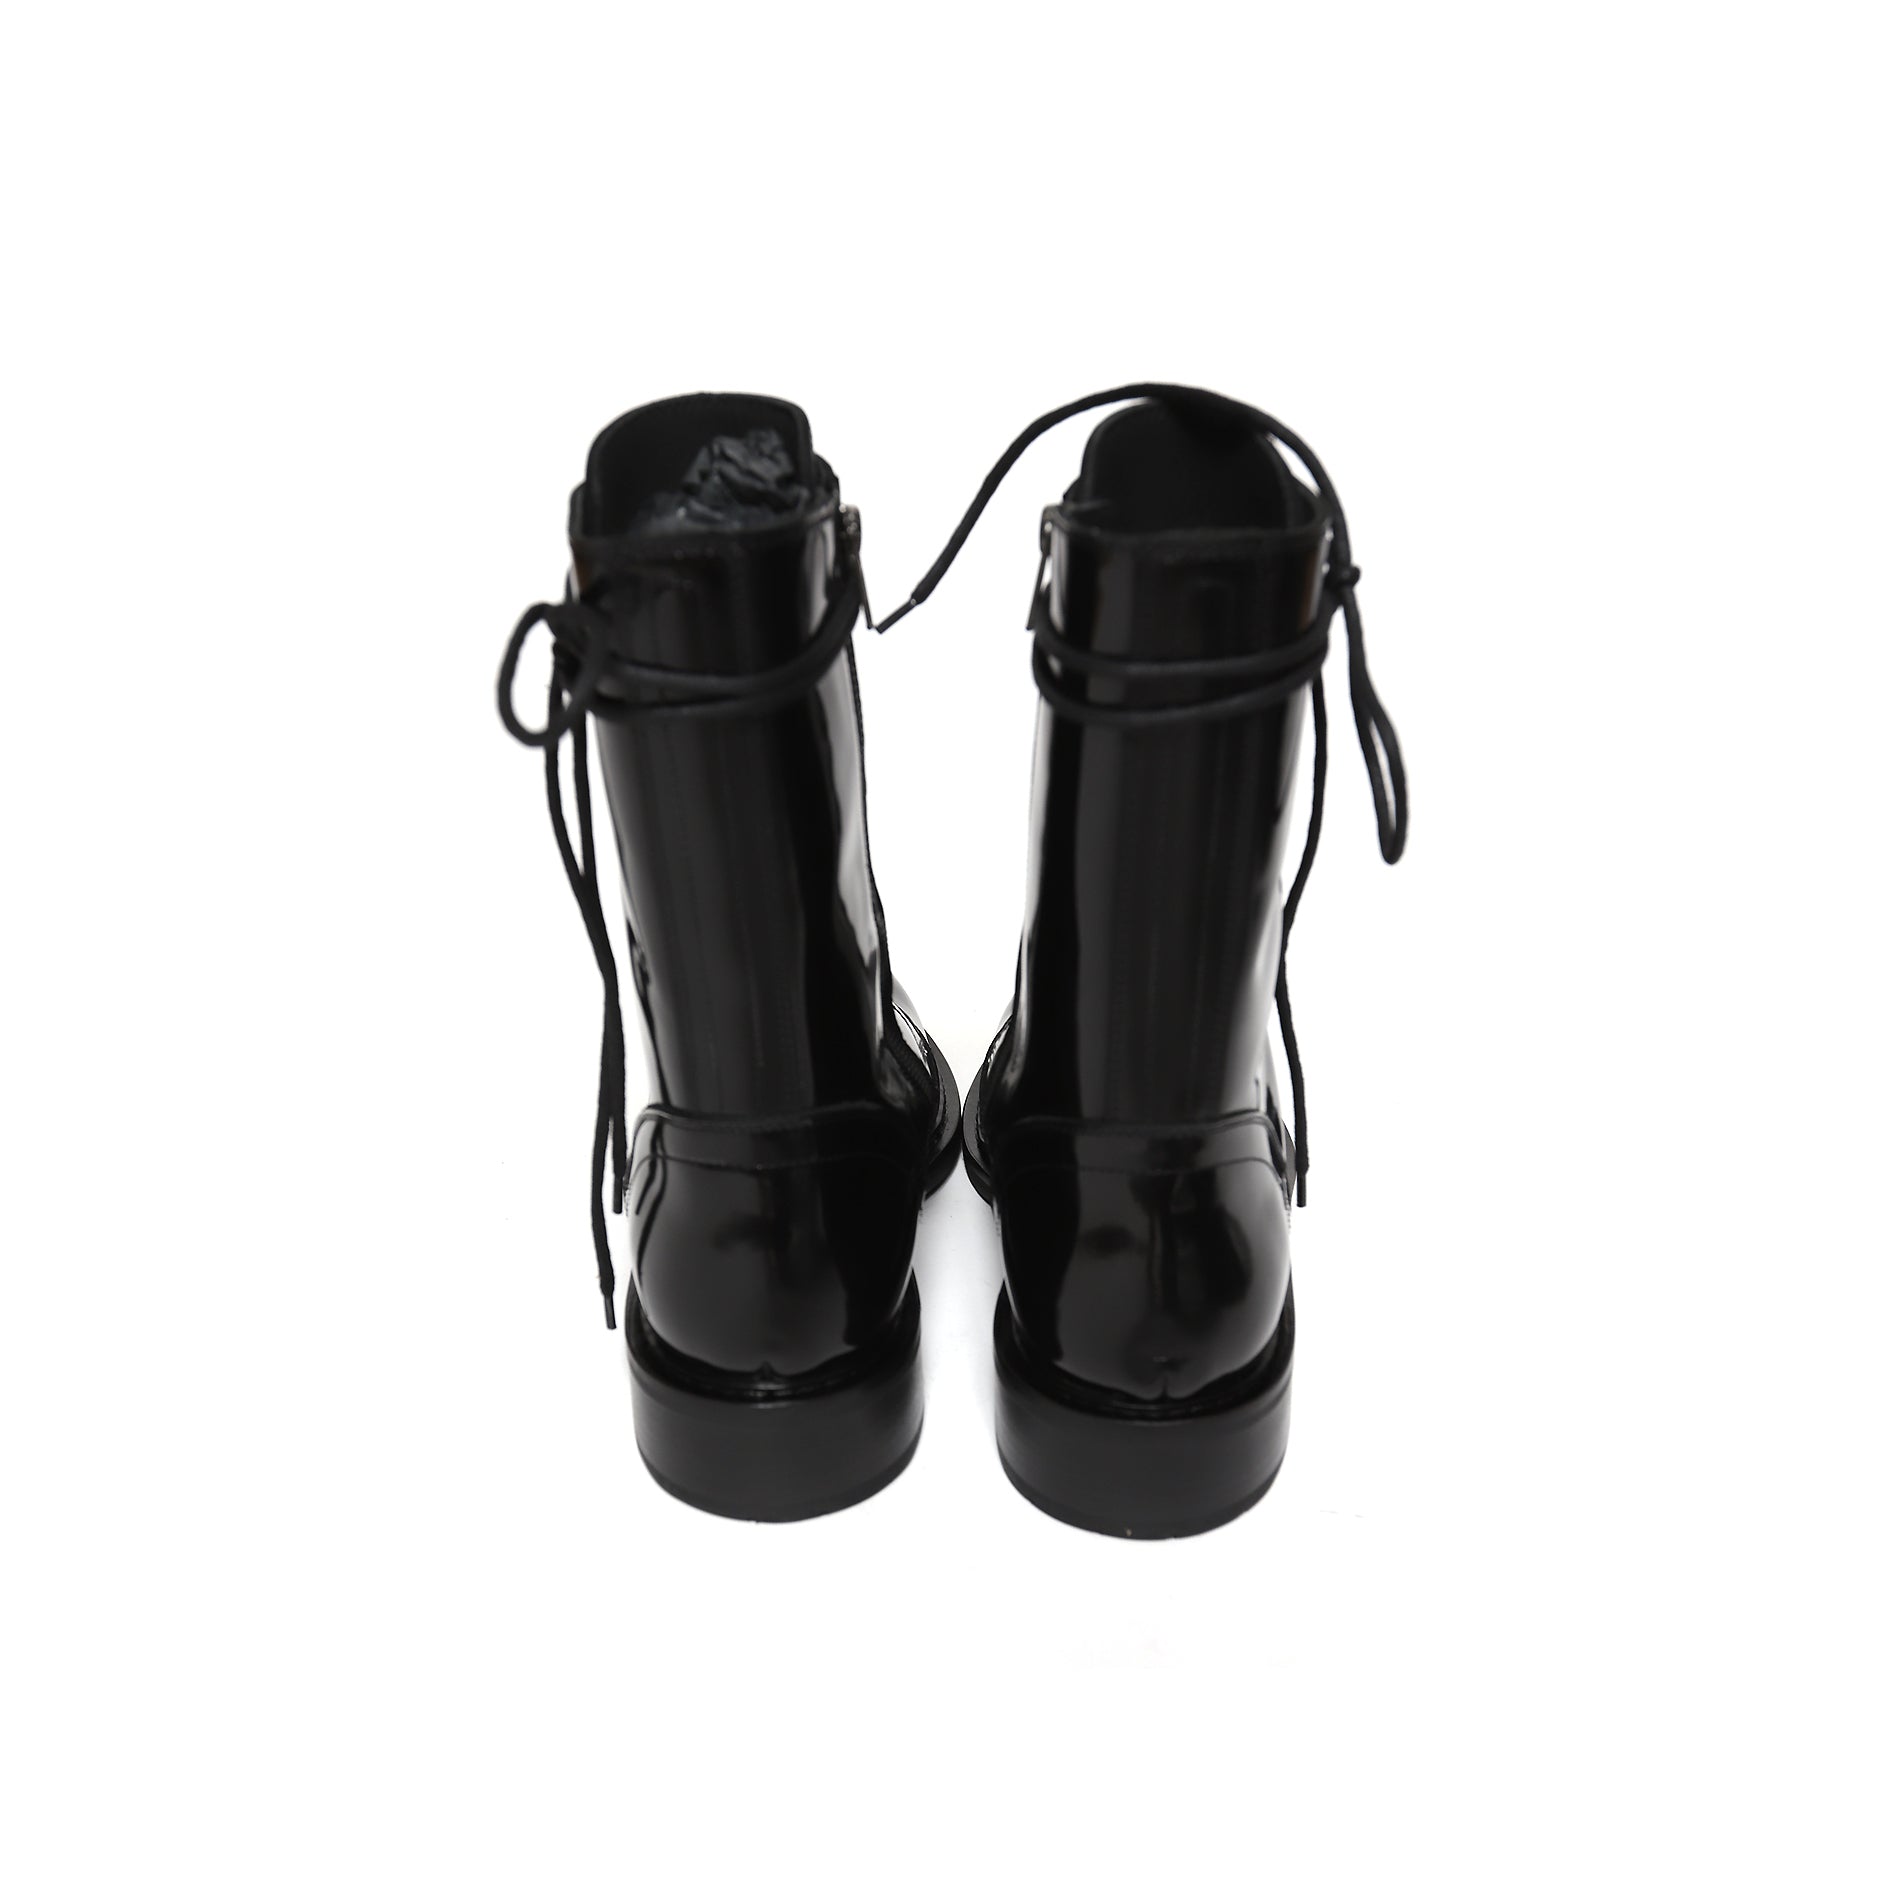 Ann Demeulemeester Black Patent Leather Lace-Up Combat Boots